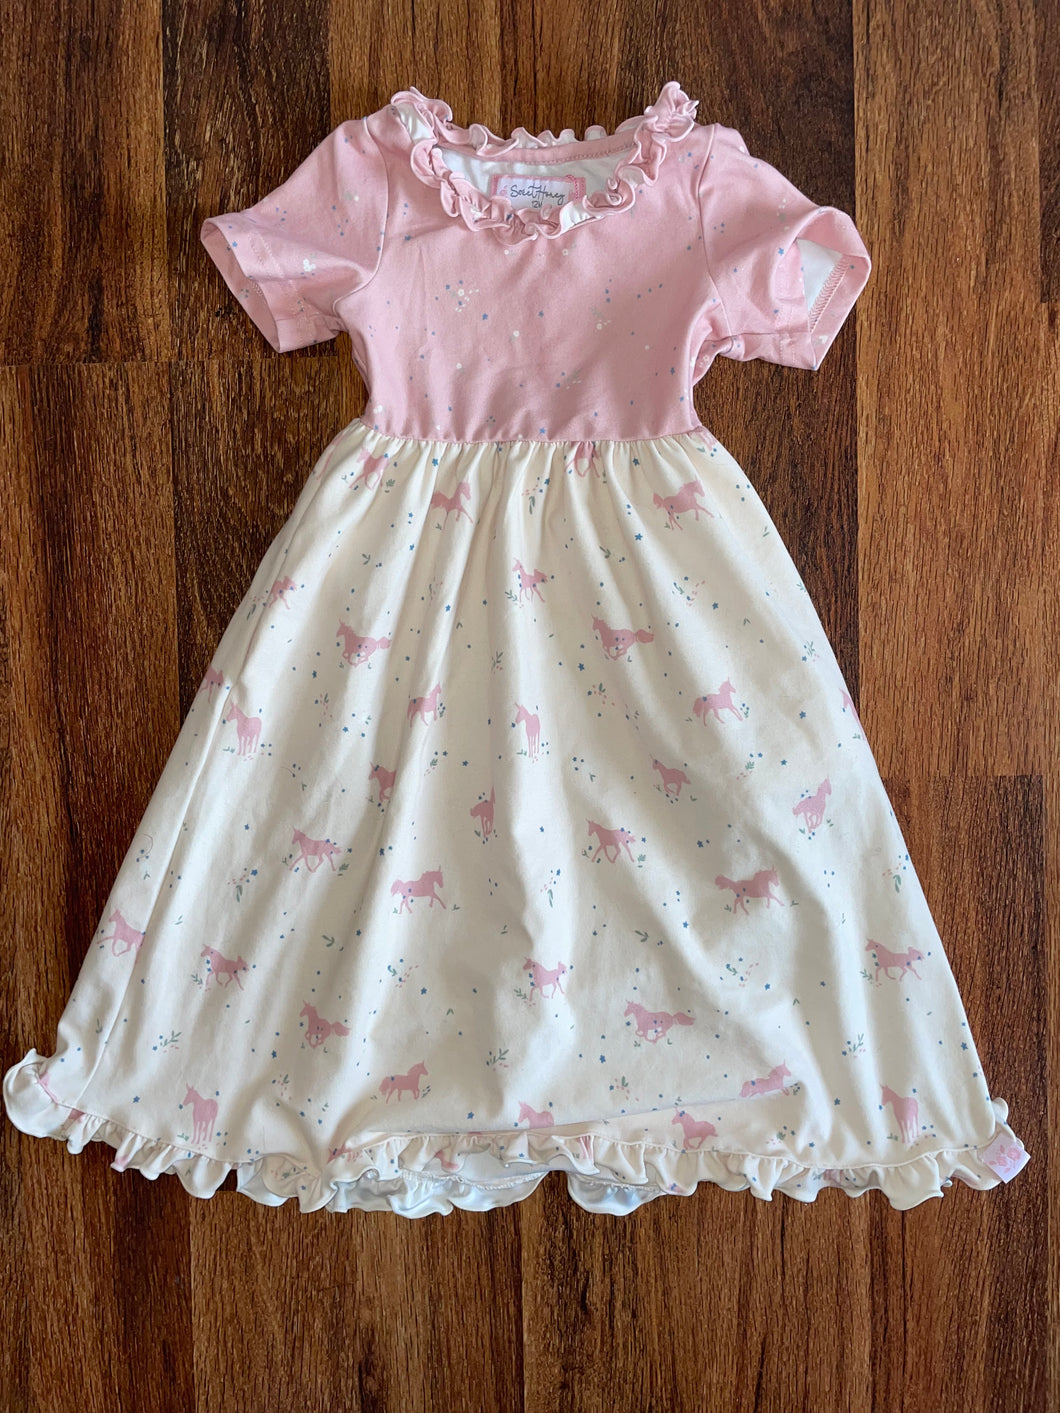 Sweet Honey 12 month nightgown